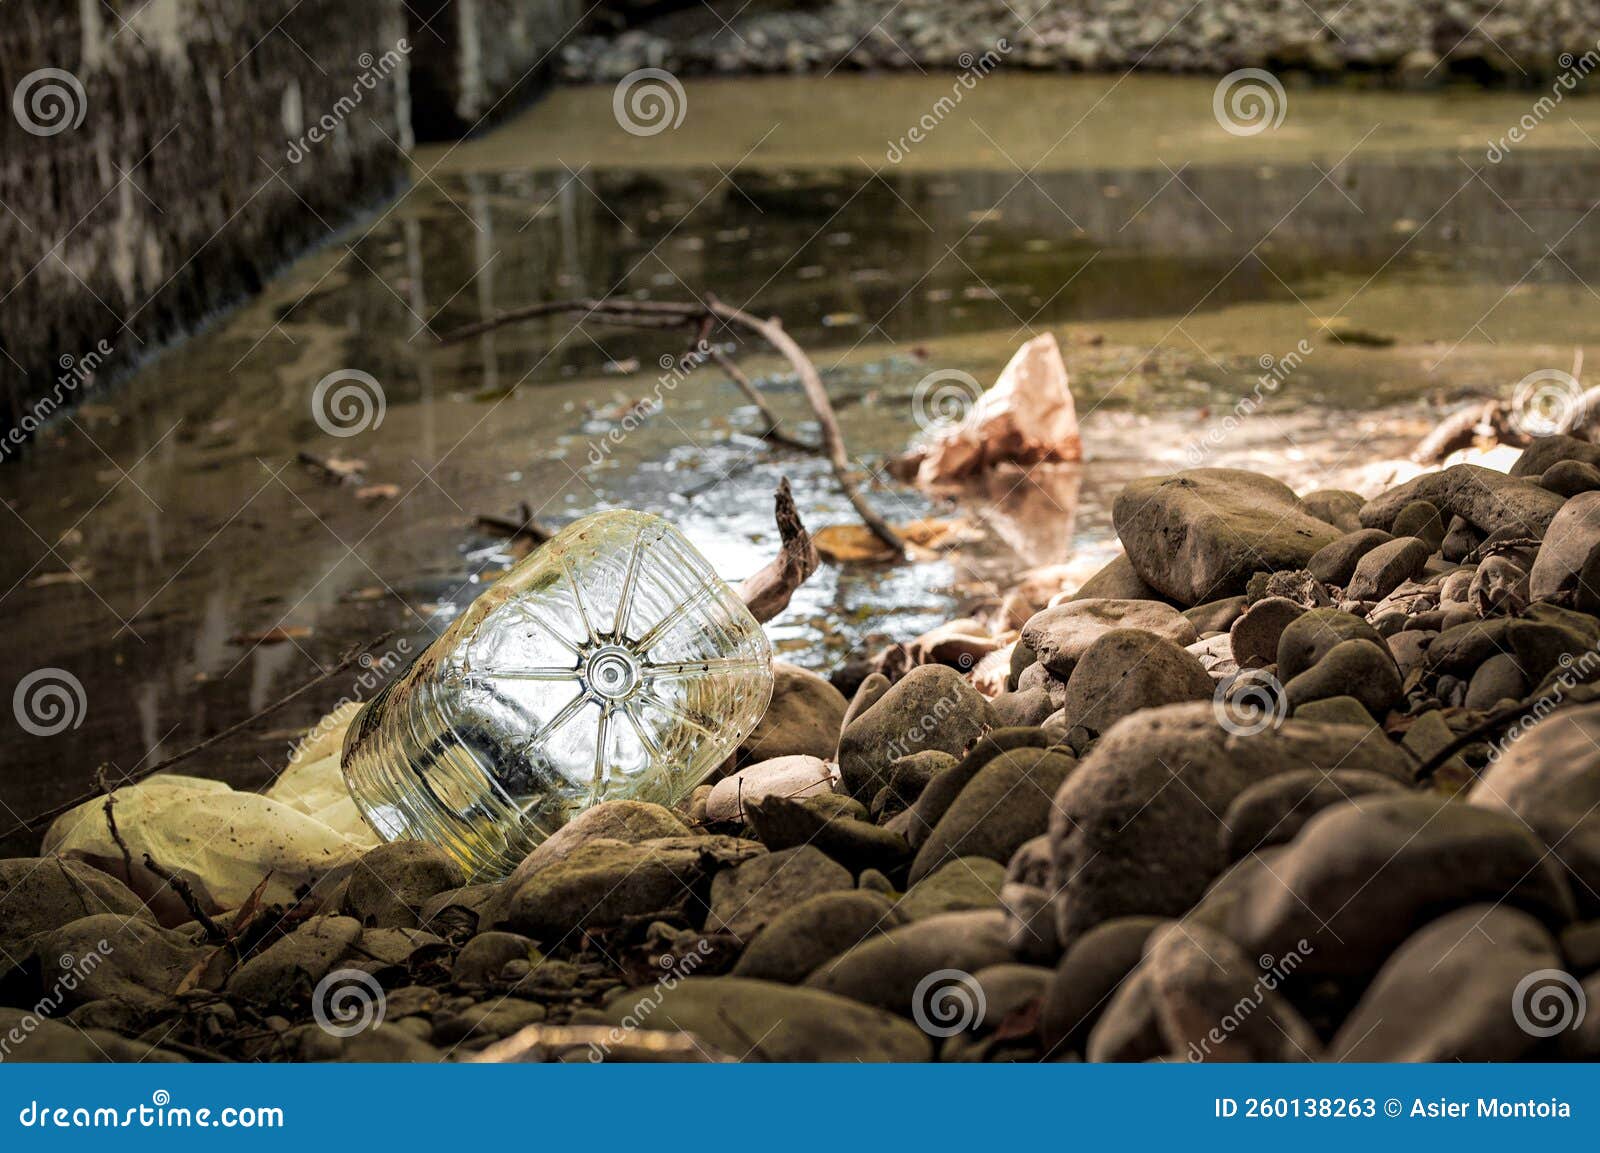 pollution and garbage accumulate on the banks of the baia river